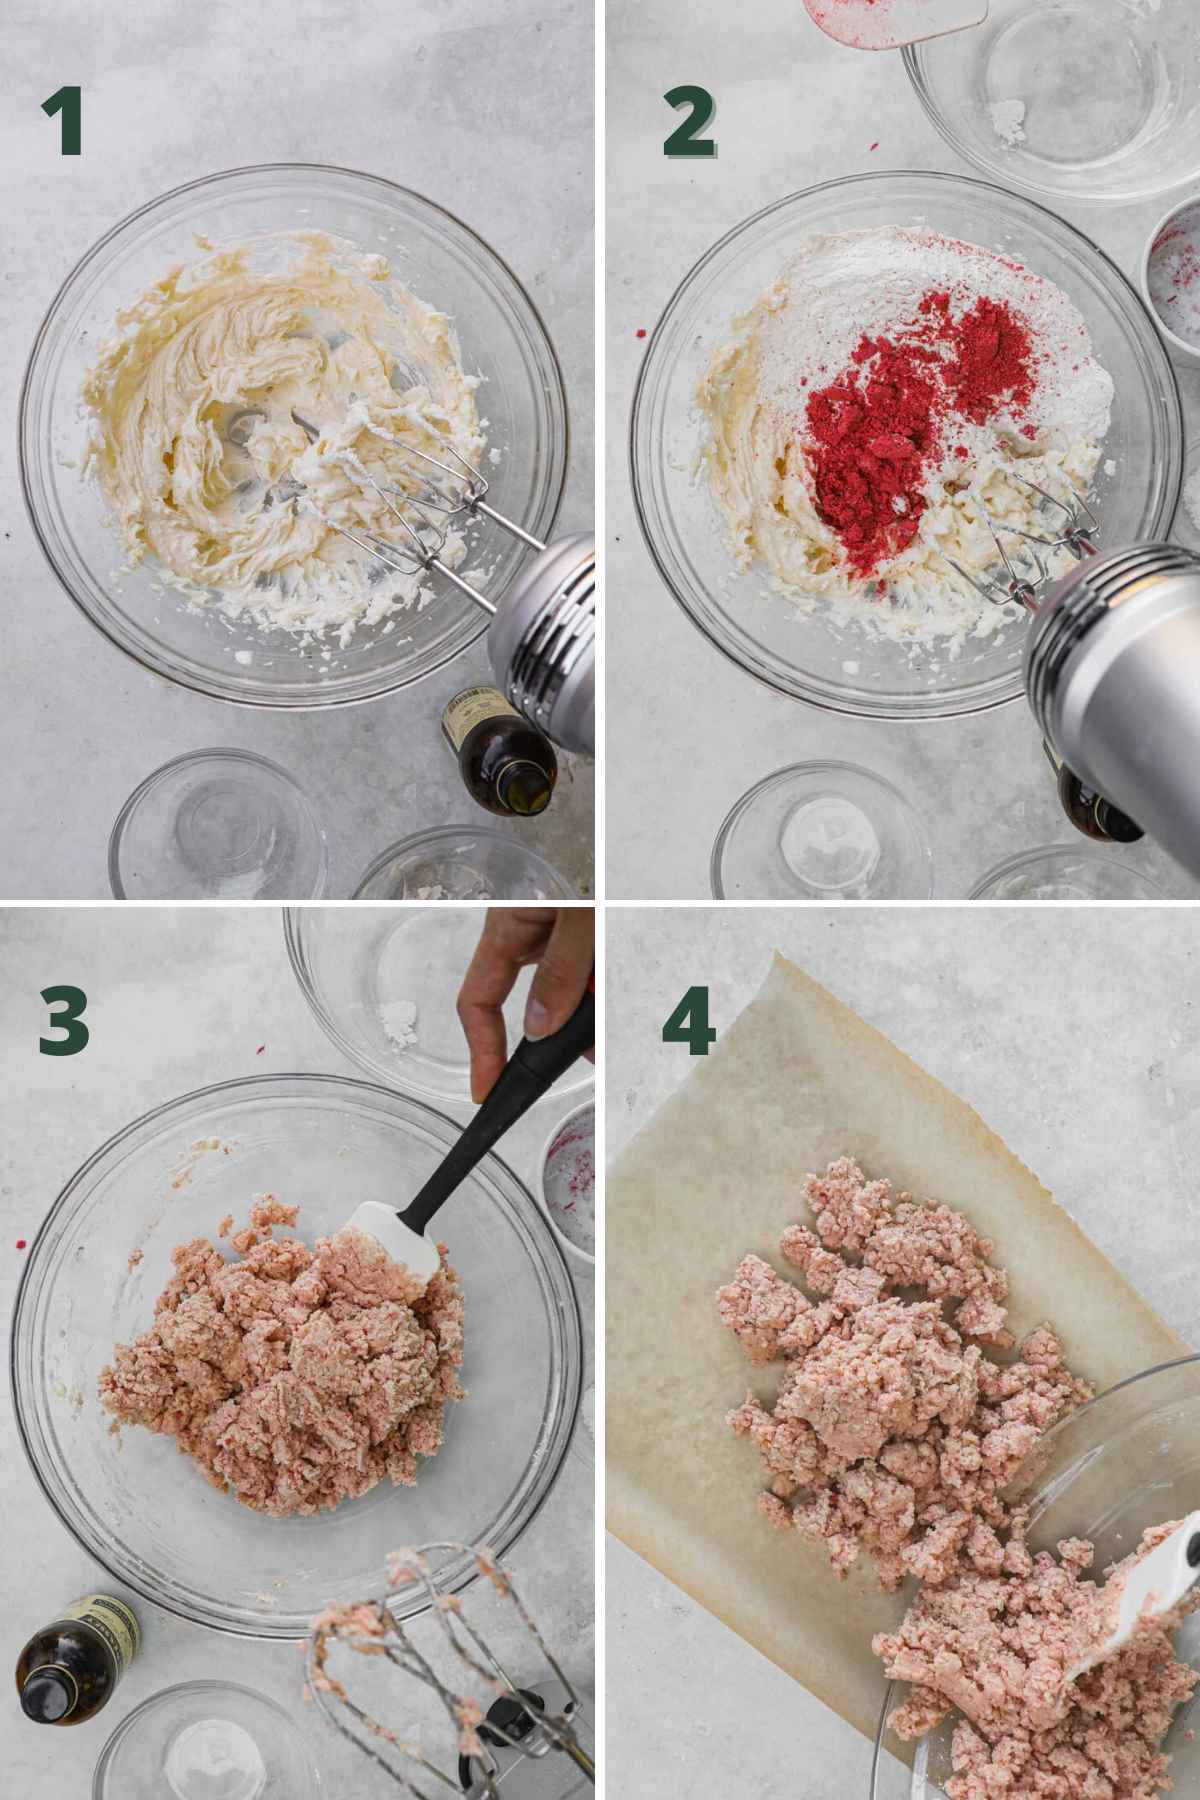 Steps to make strawberry lemonade shortbread cookies, including creaming butter and sugar, adding flour and strawberry powder, and forming into a dough.